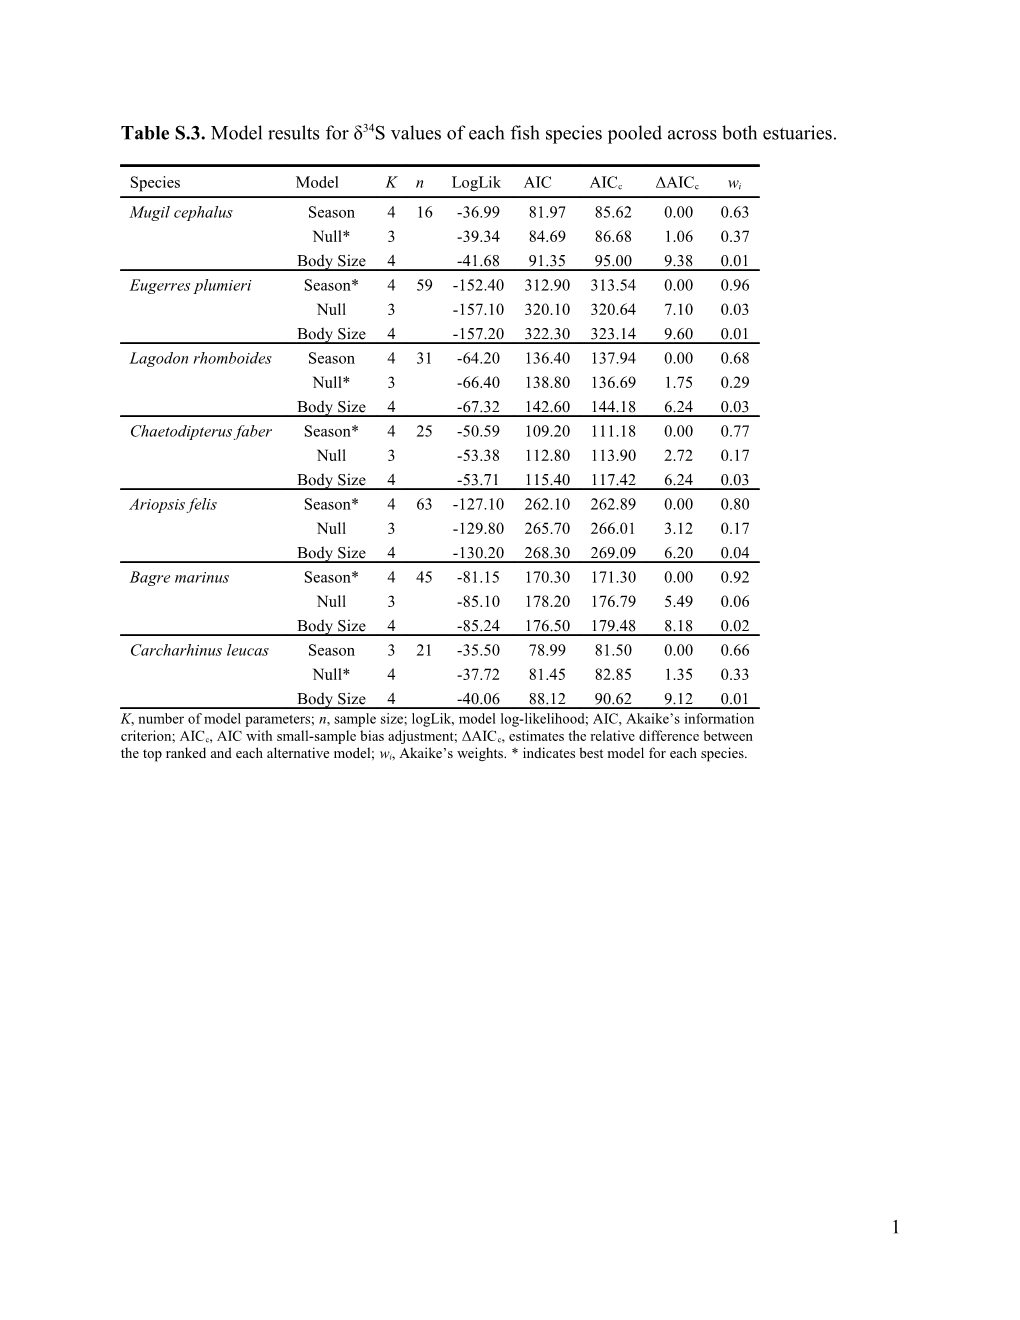 Table S.3. Model Results for Δ34s Values of Each Fish Species Pooled Across Both Estuaries